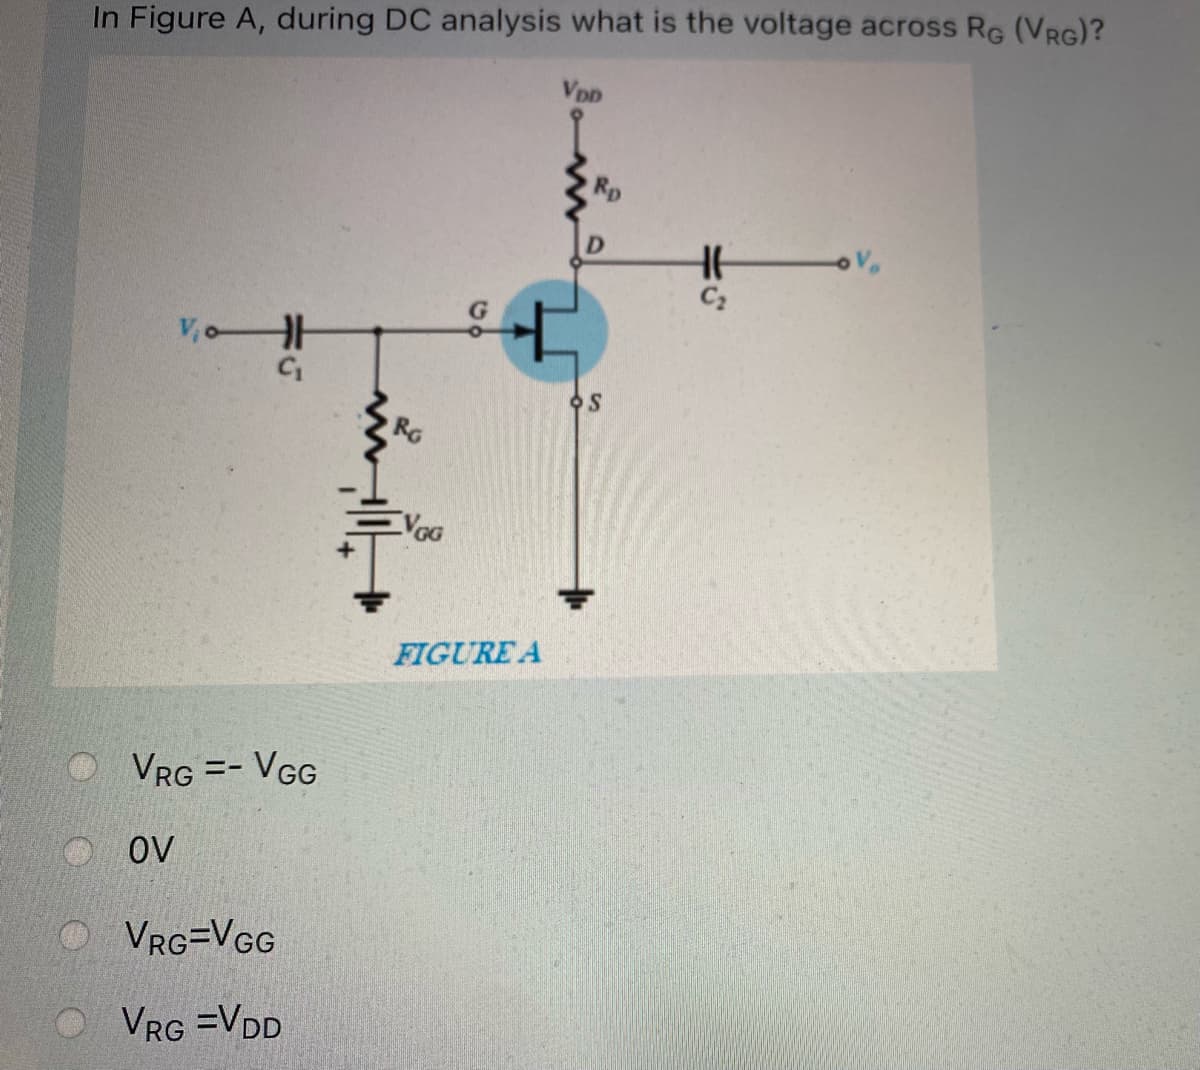 In Figure A, during DC analysis what is the voltage across RG (VRG)?
VDD
Rp
C2
V,oHH
FIGURE A
VRG =- VGG
OV
O VRG=VGG
O VRG =VDD
